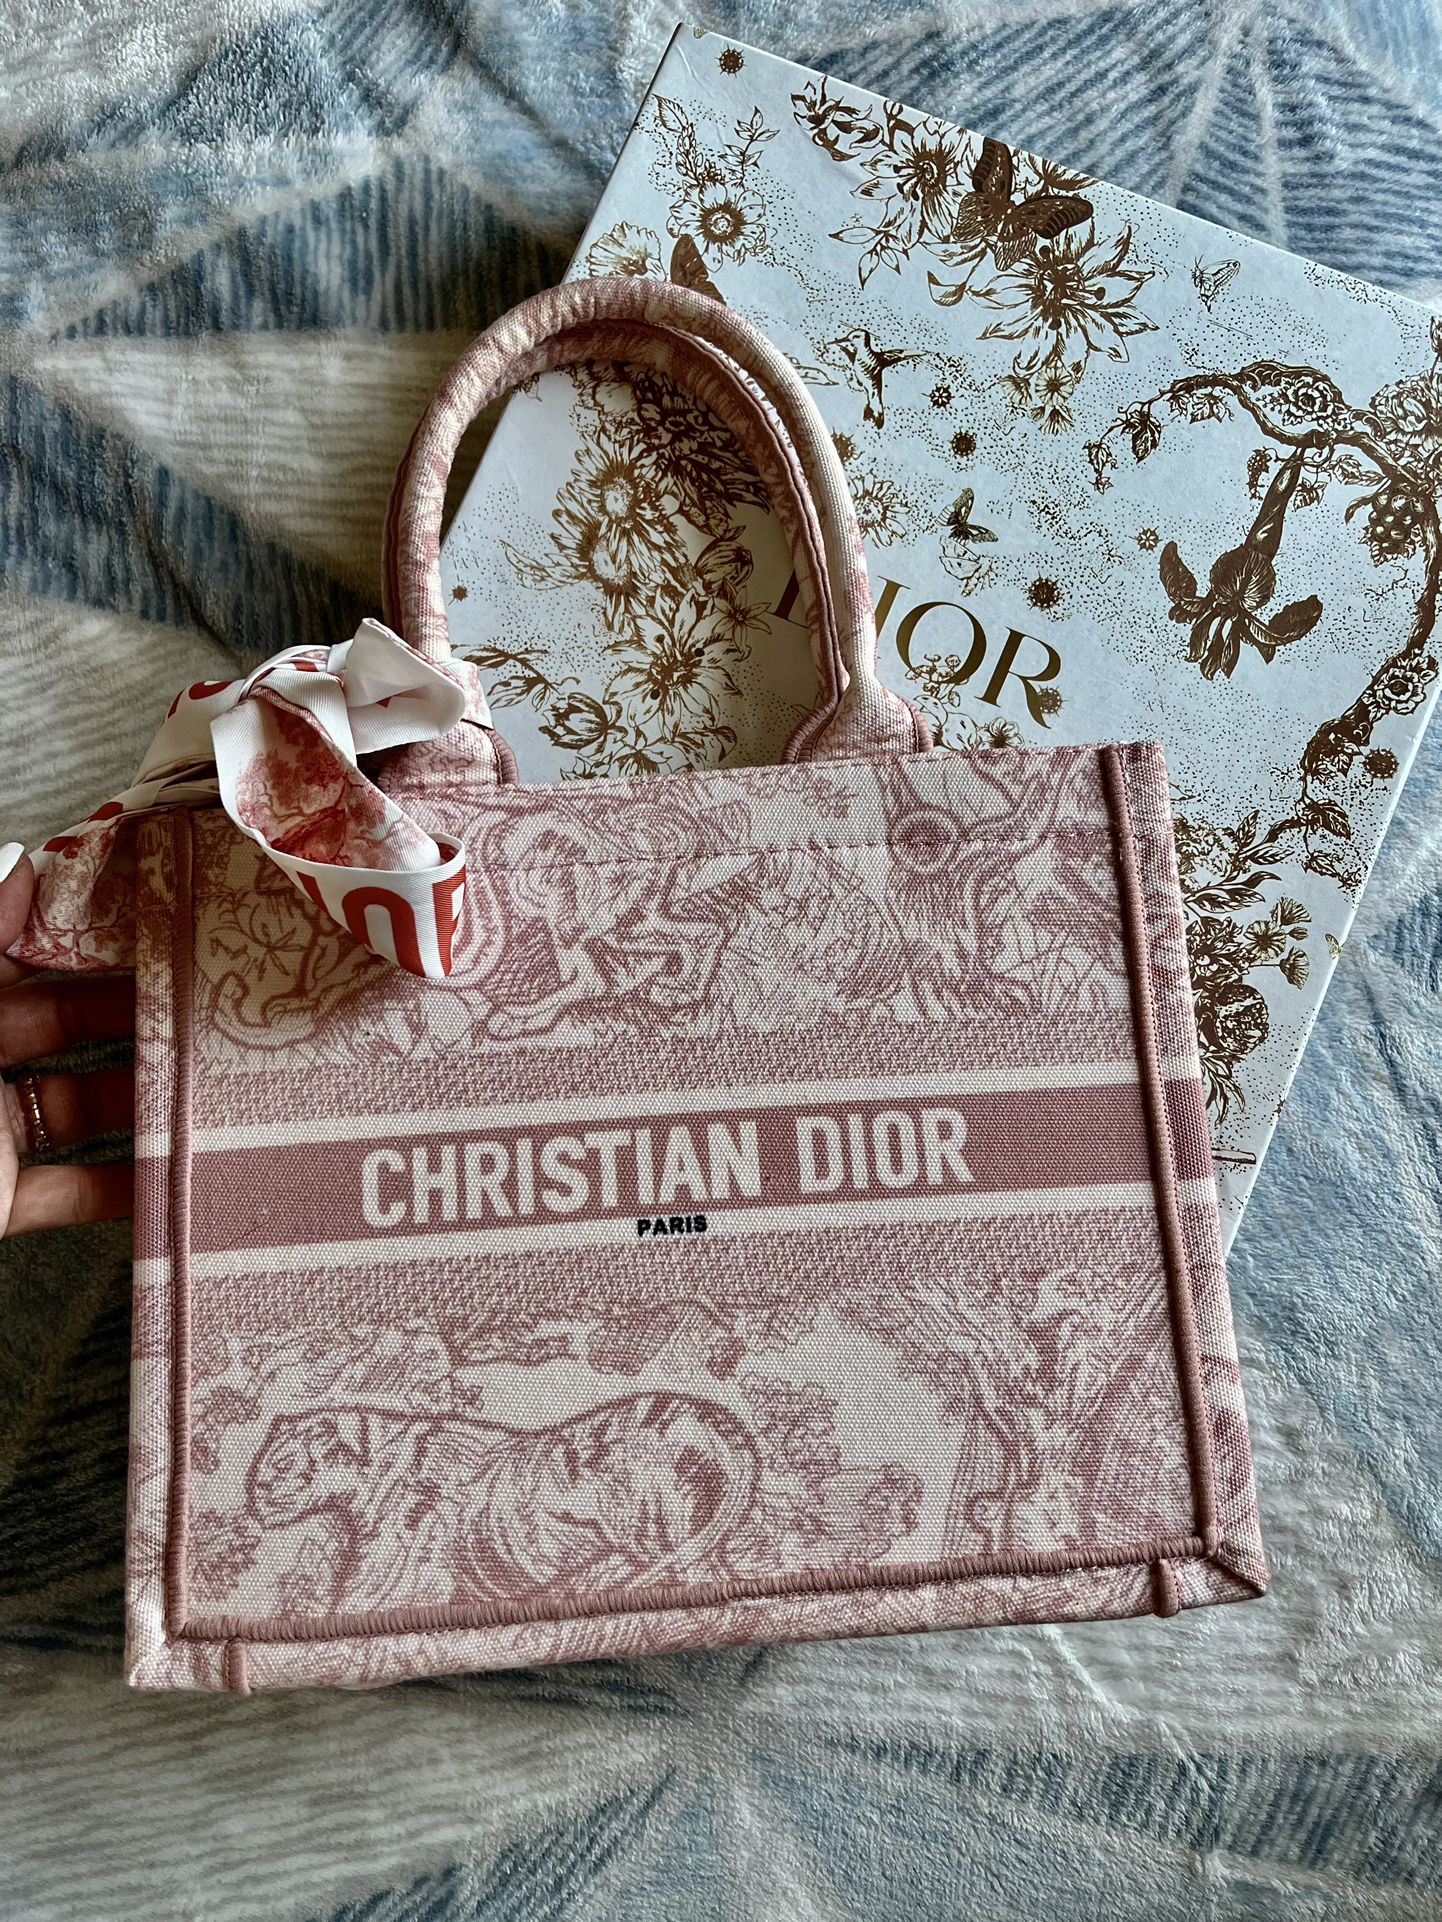 Christian Dior Mini Book Tote Pink for Sale in Ocean Springs, MS